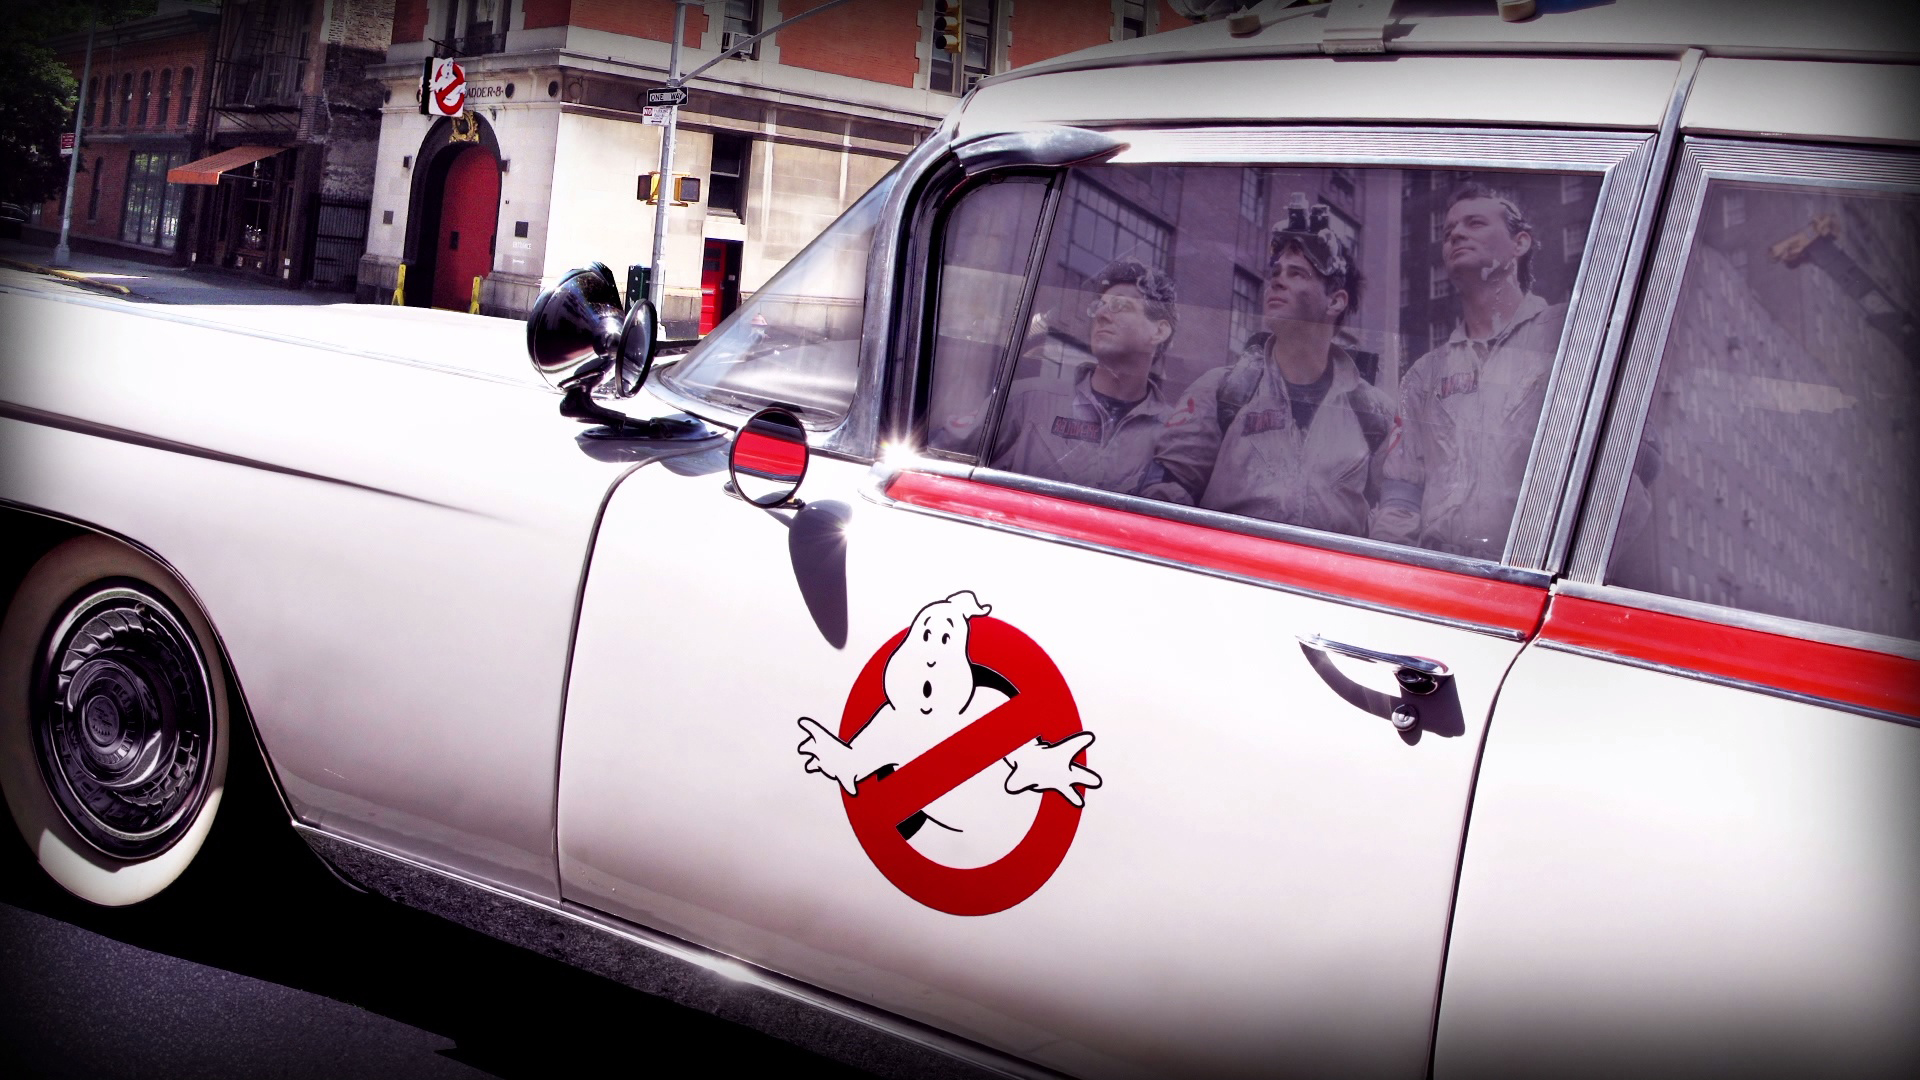 Movie Ghostbusters HD Wallpaper | Background Image